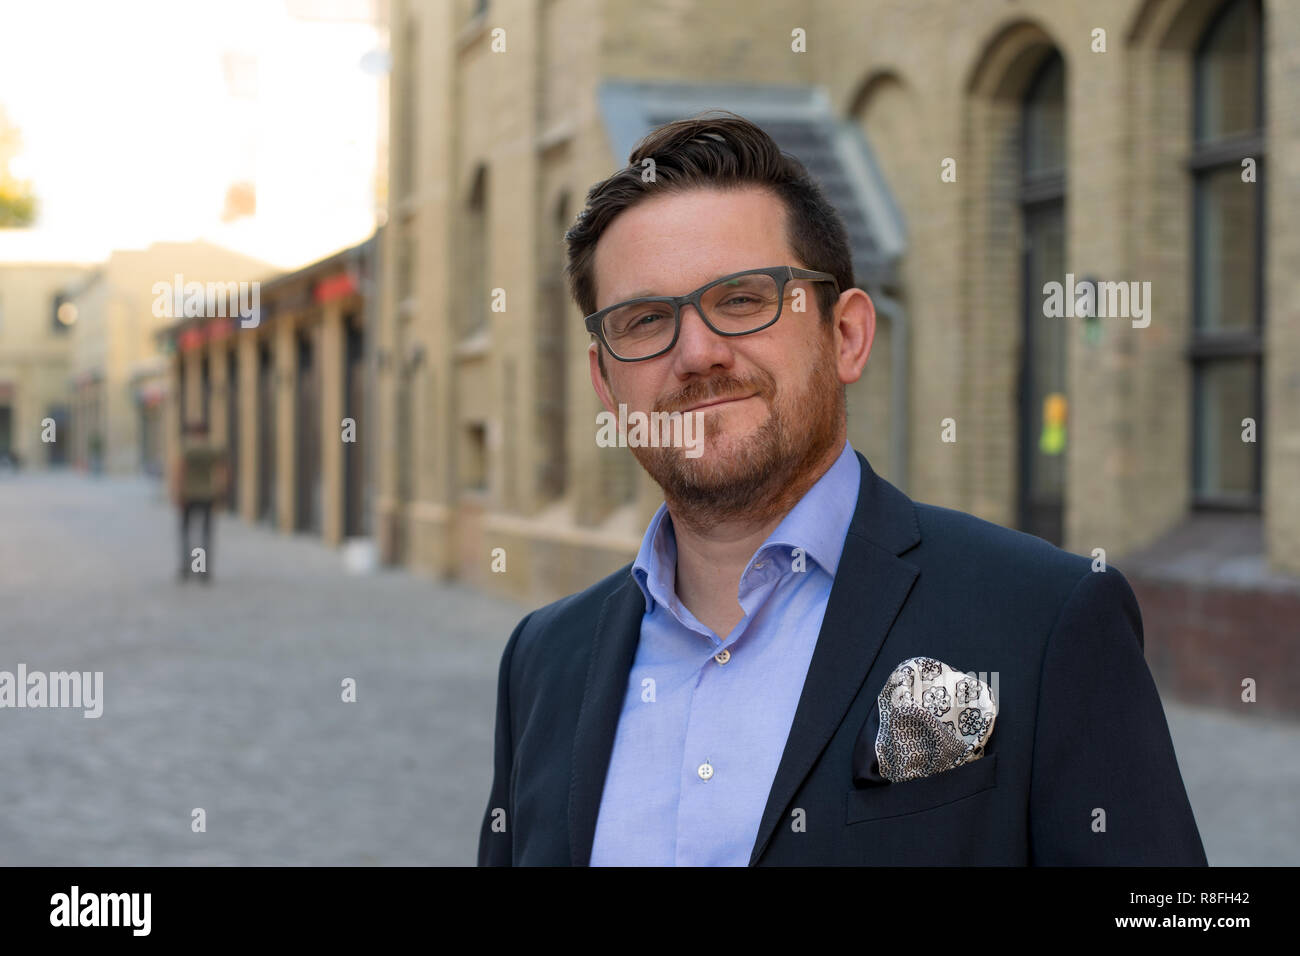 Business man with glasses outside Stock Photo